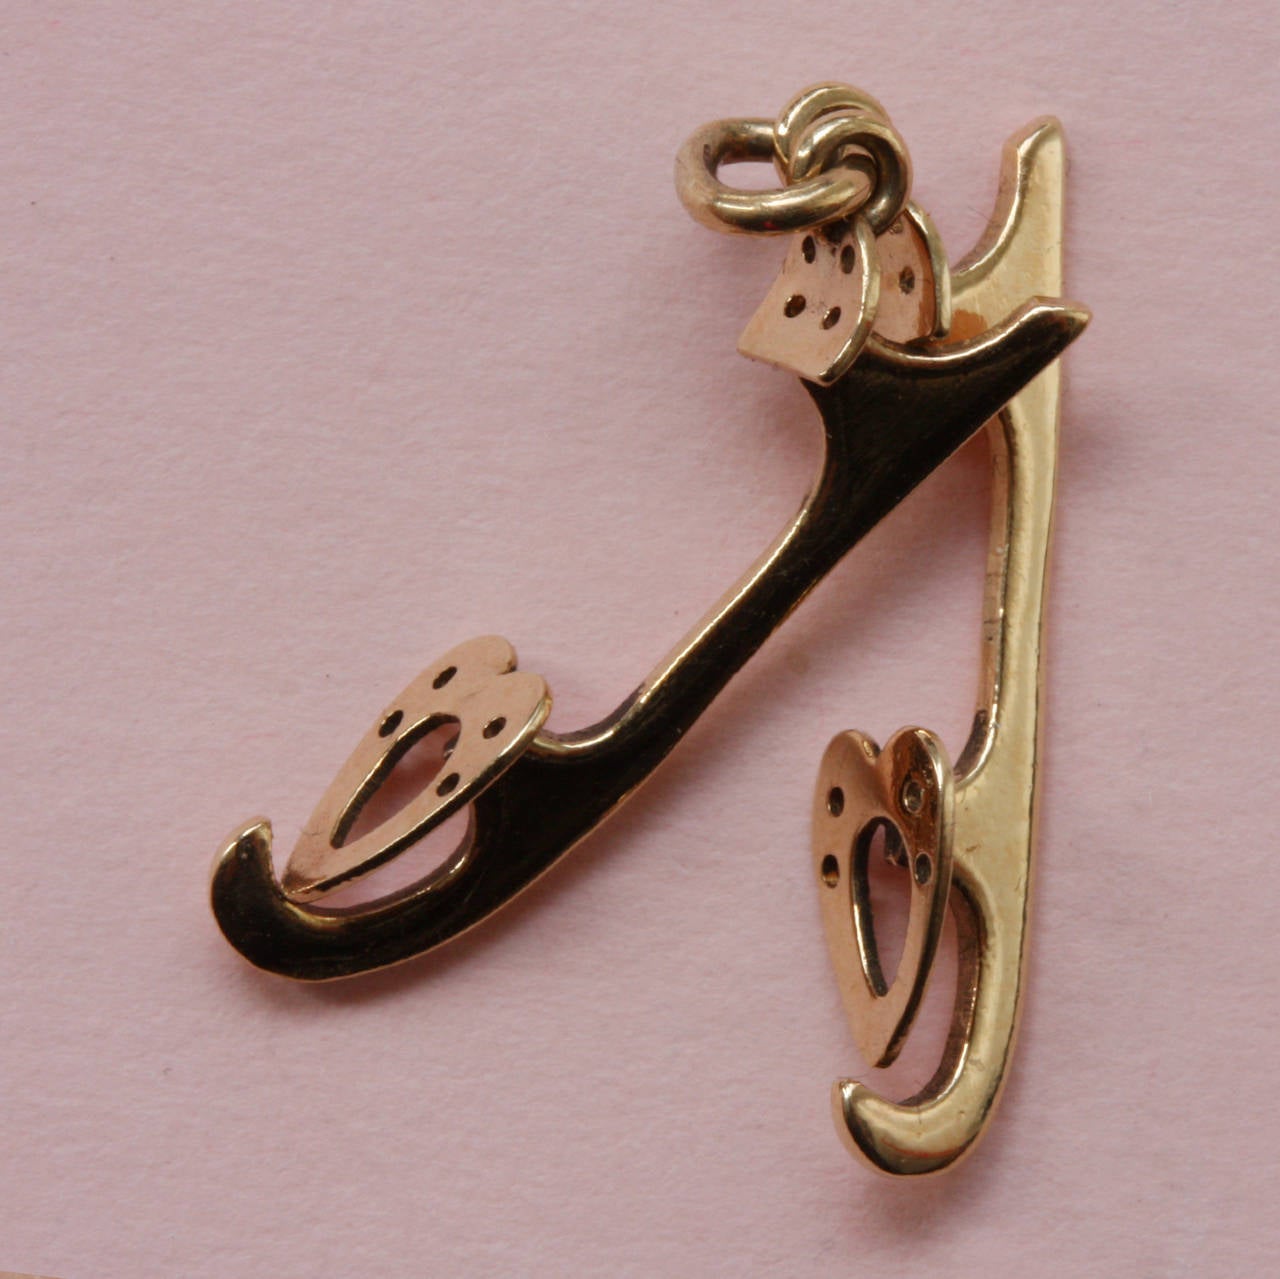 A 14 carat gold love charm of two ice-skates with hearts, each skate is signed: Cartier.

weight: 1.5 grams
length: 2 cm.